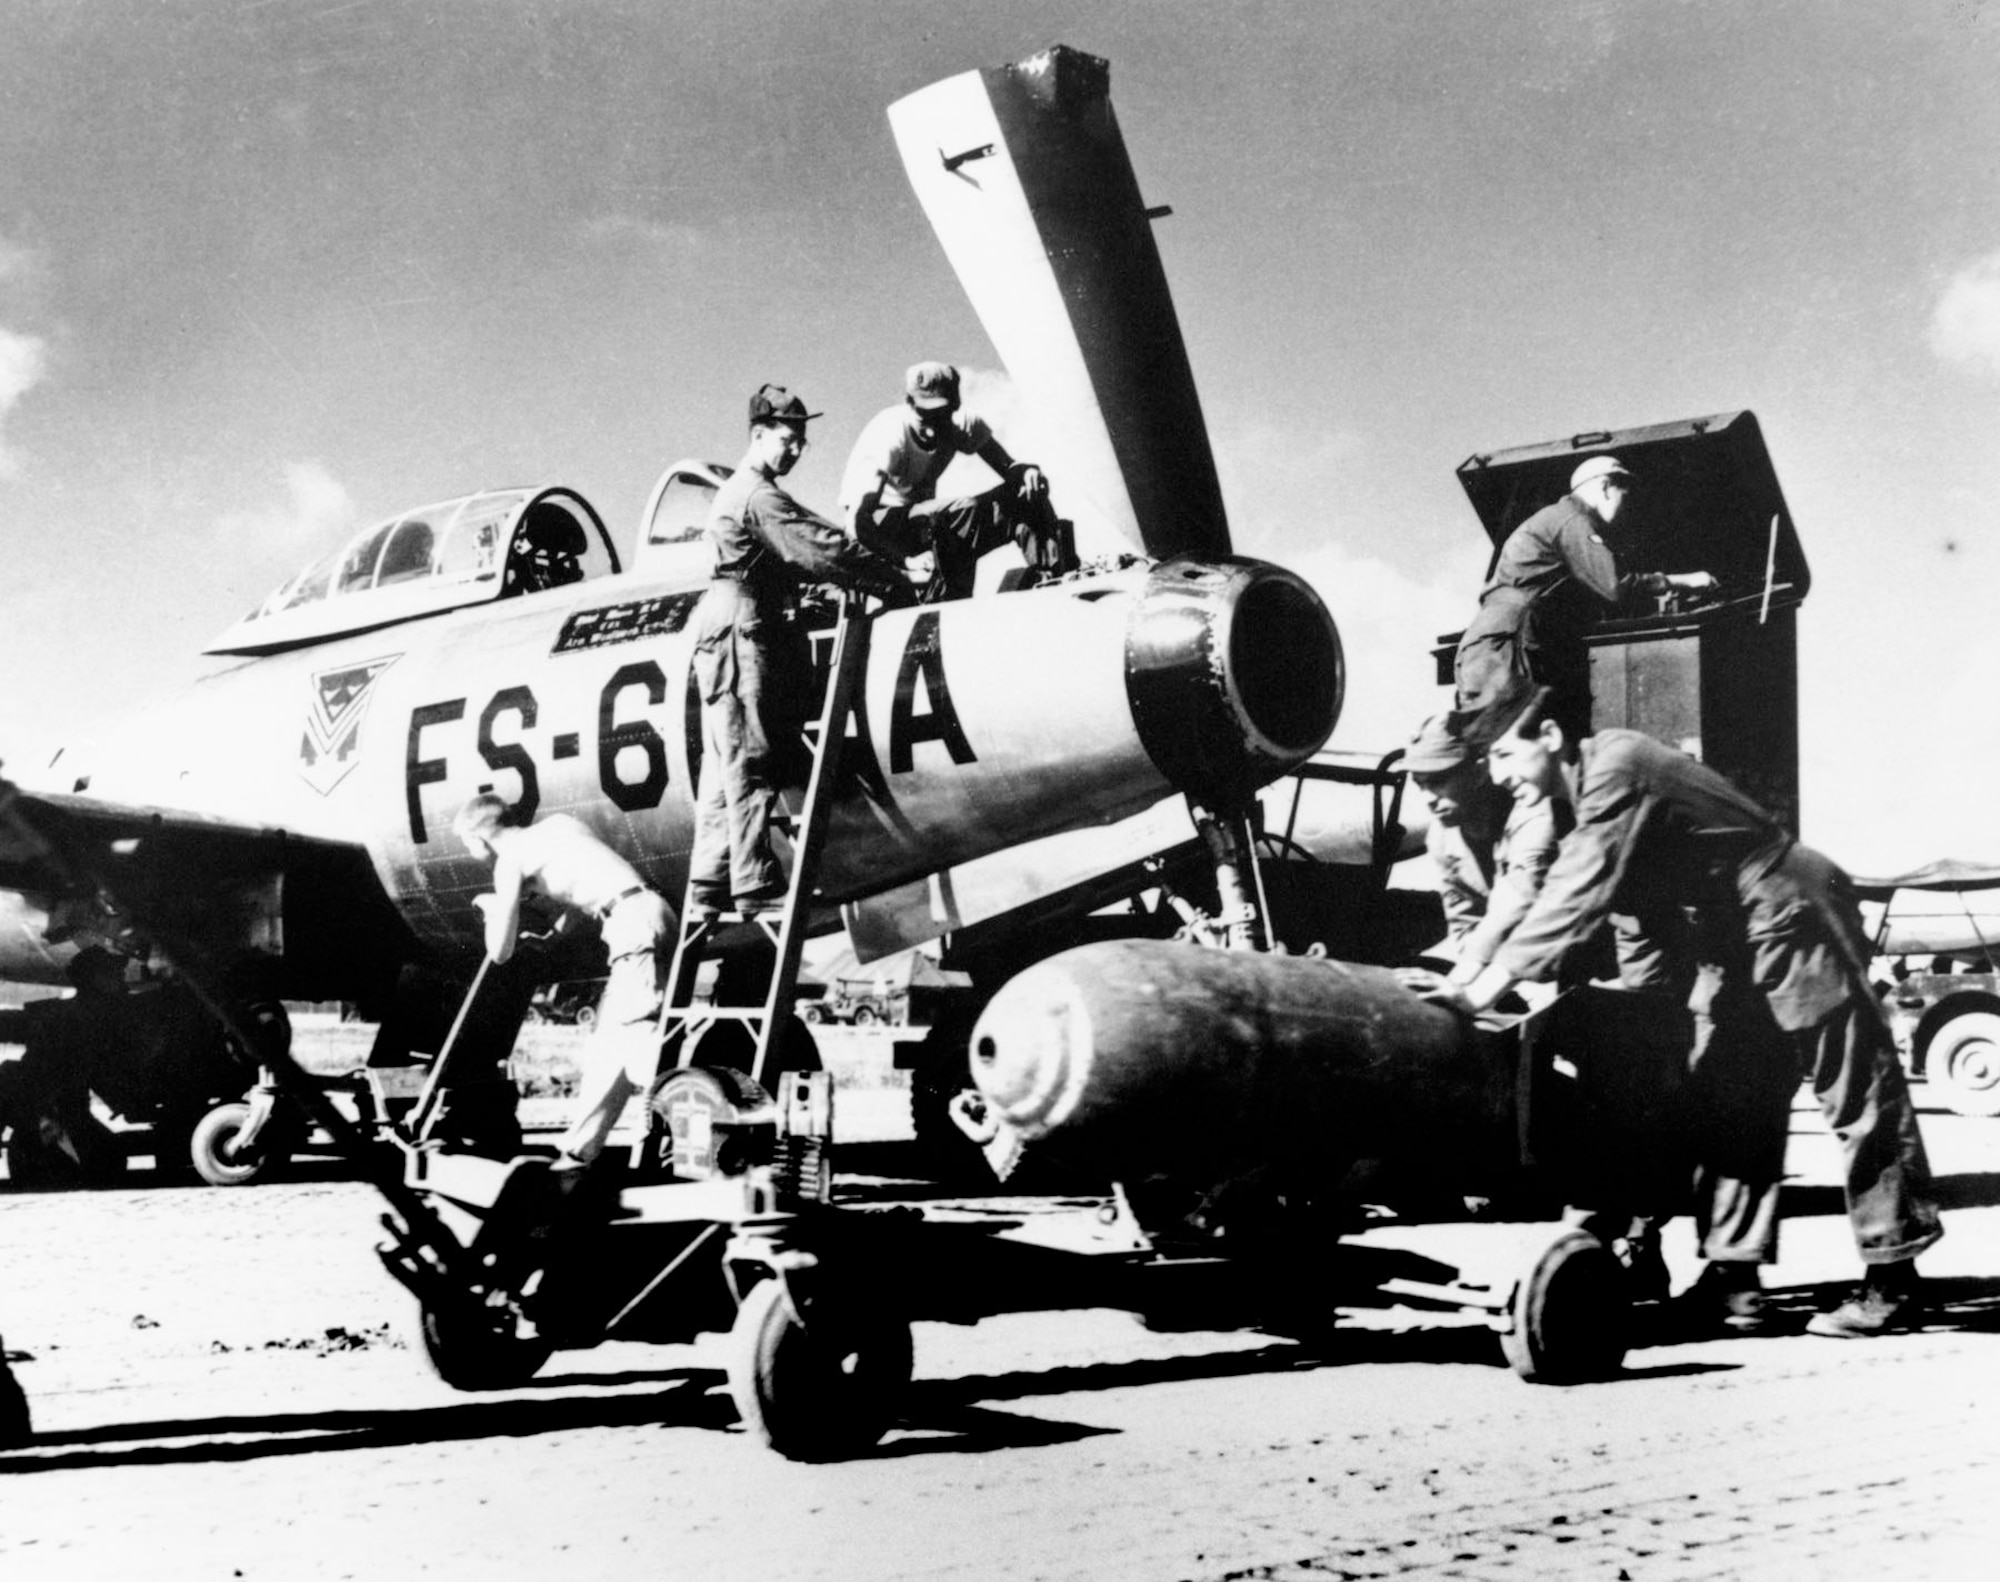 Ground crewmen from the Florida Air National Guard’s 159th Fighter Squadron ready an F-84 for combat in Korea. (U.S. Air Force photo)